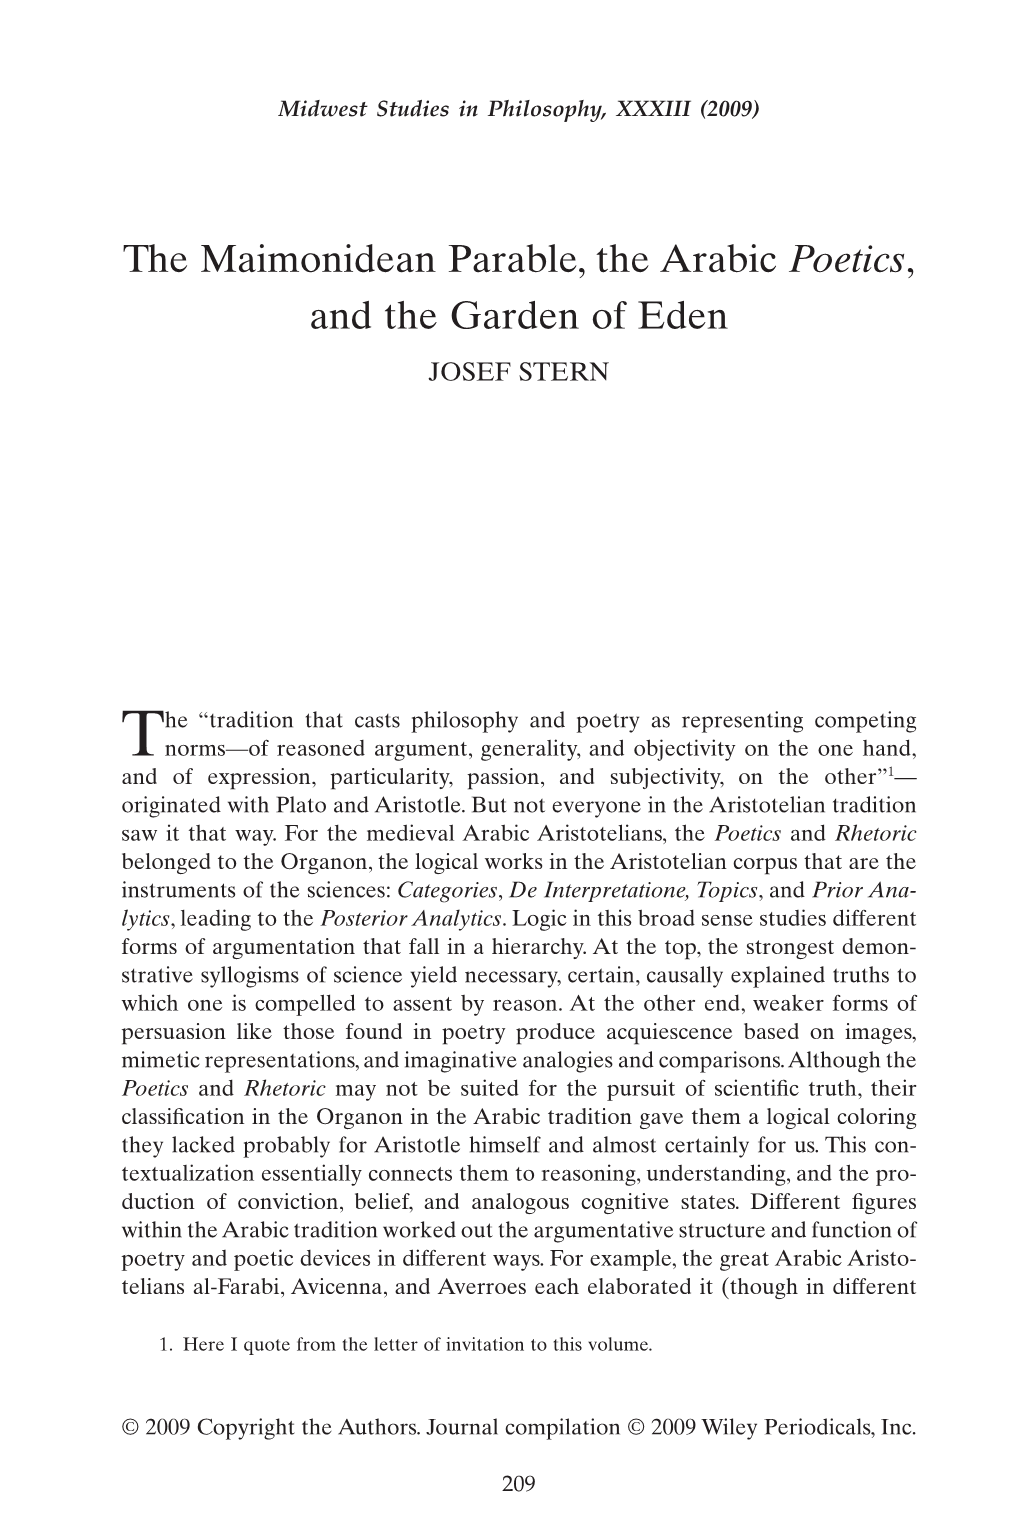 The Maimonidean Parable, the Arabic Poetics, and the Garden of Eden JOSEF STERN